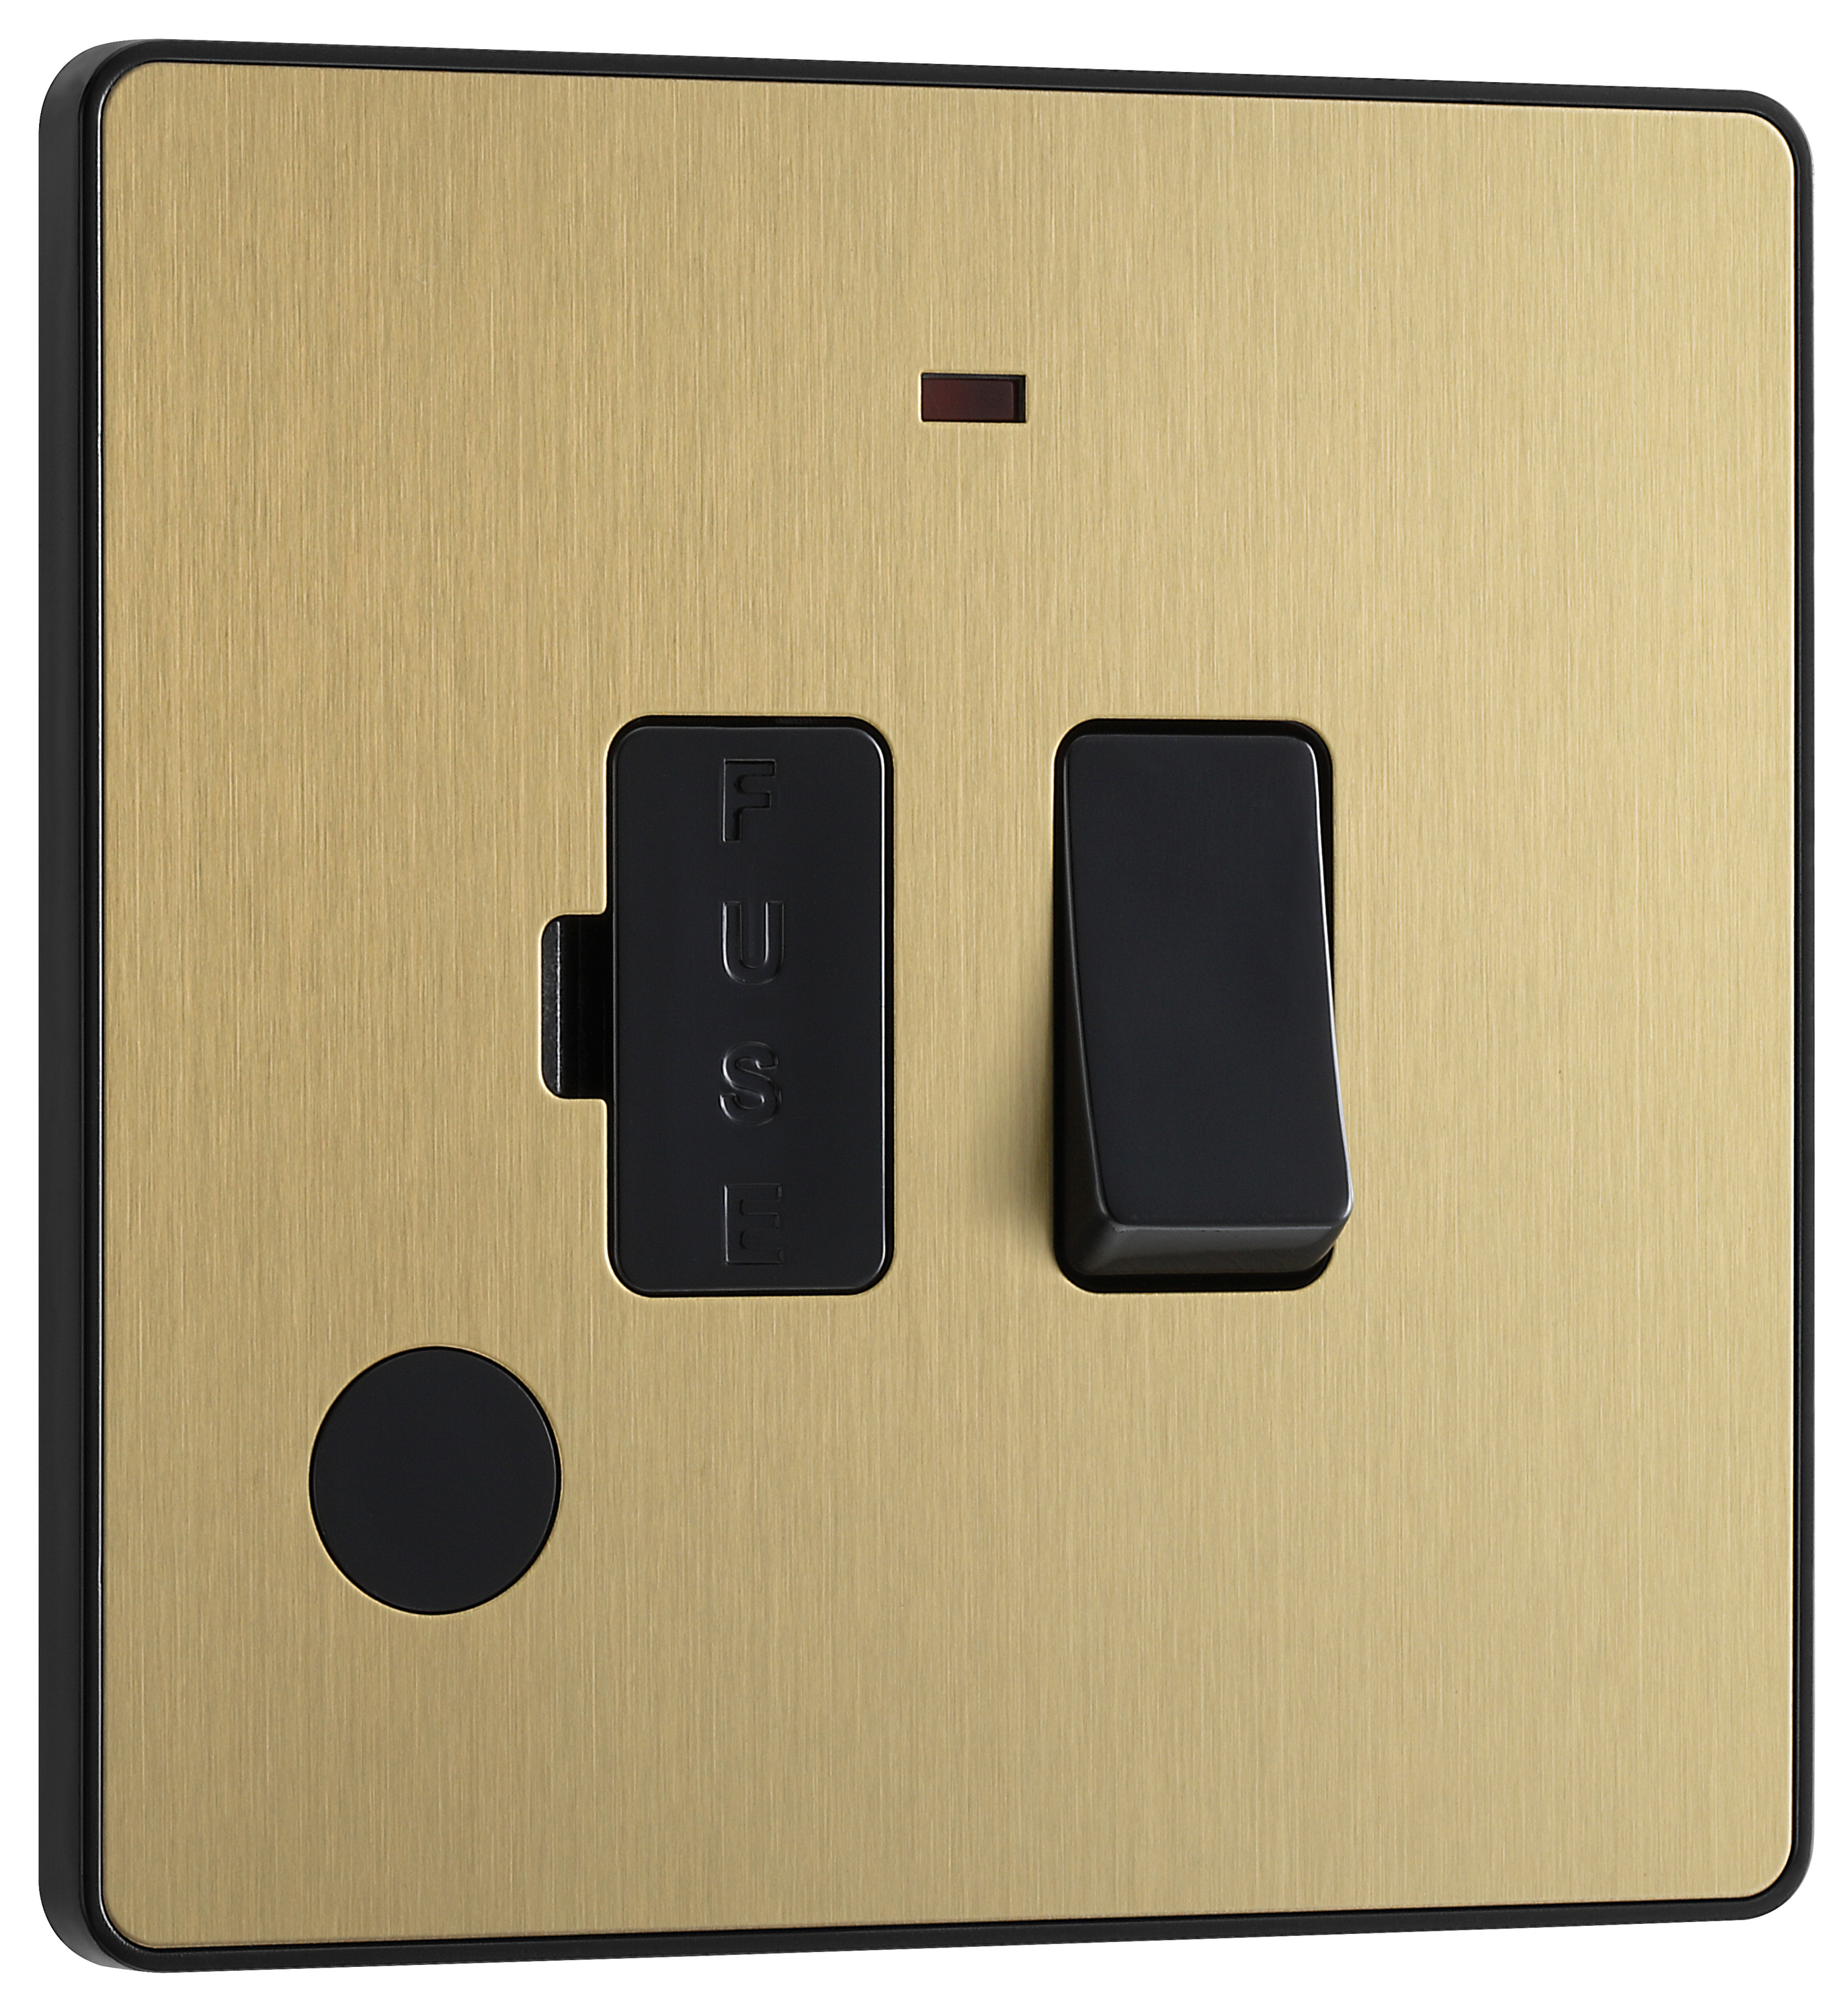 Image of BG Evolve Brushed Brass 13A Switched Fused Connection Unit with Power Led Indicator & Flex Outlet